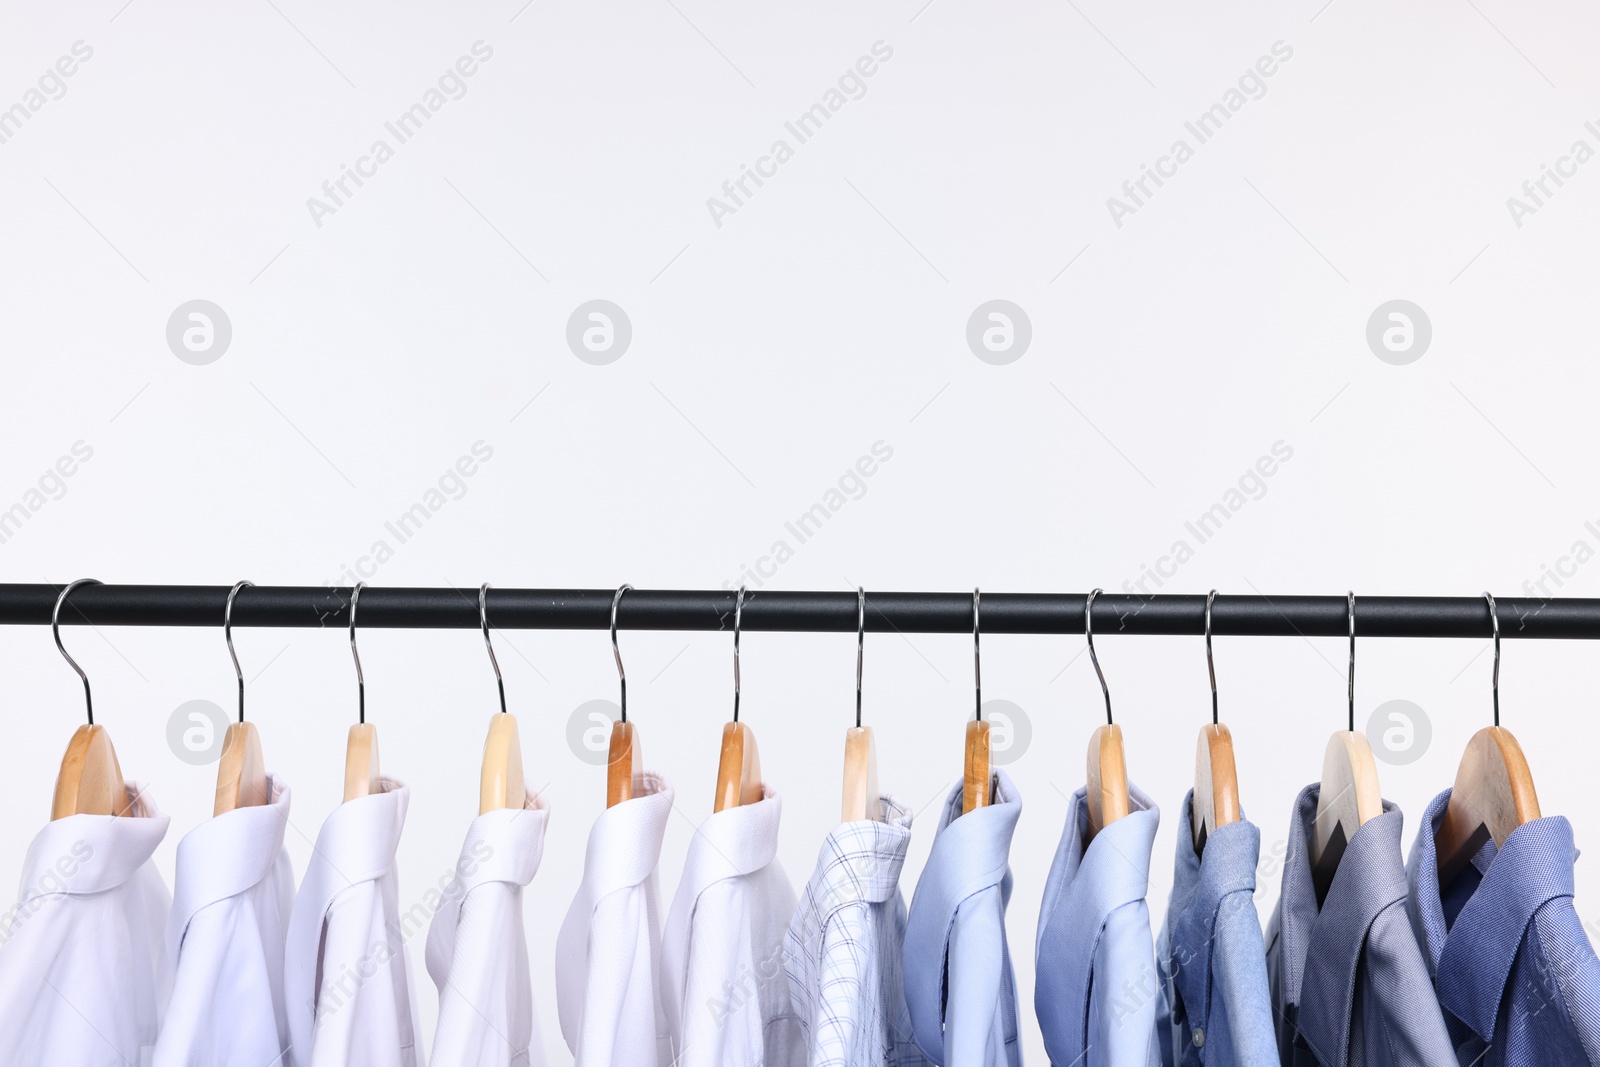 Photo of Dry-cleaning service. Many different clothes hanging on rack against white background, space copy text